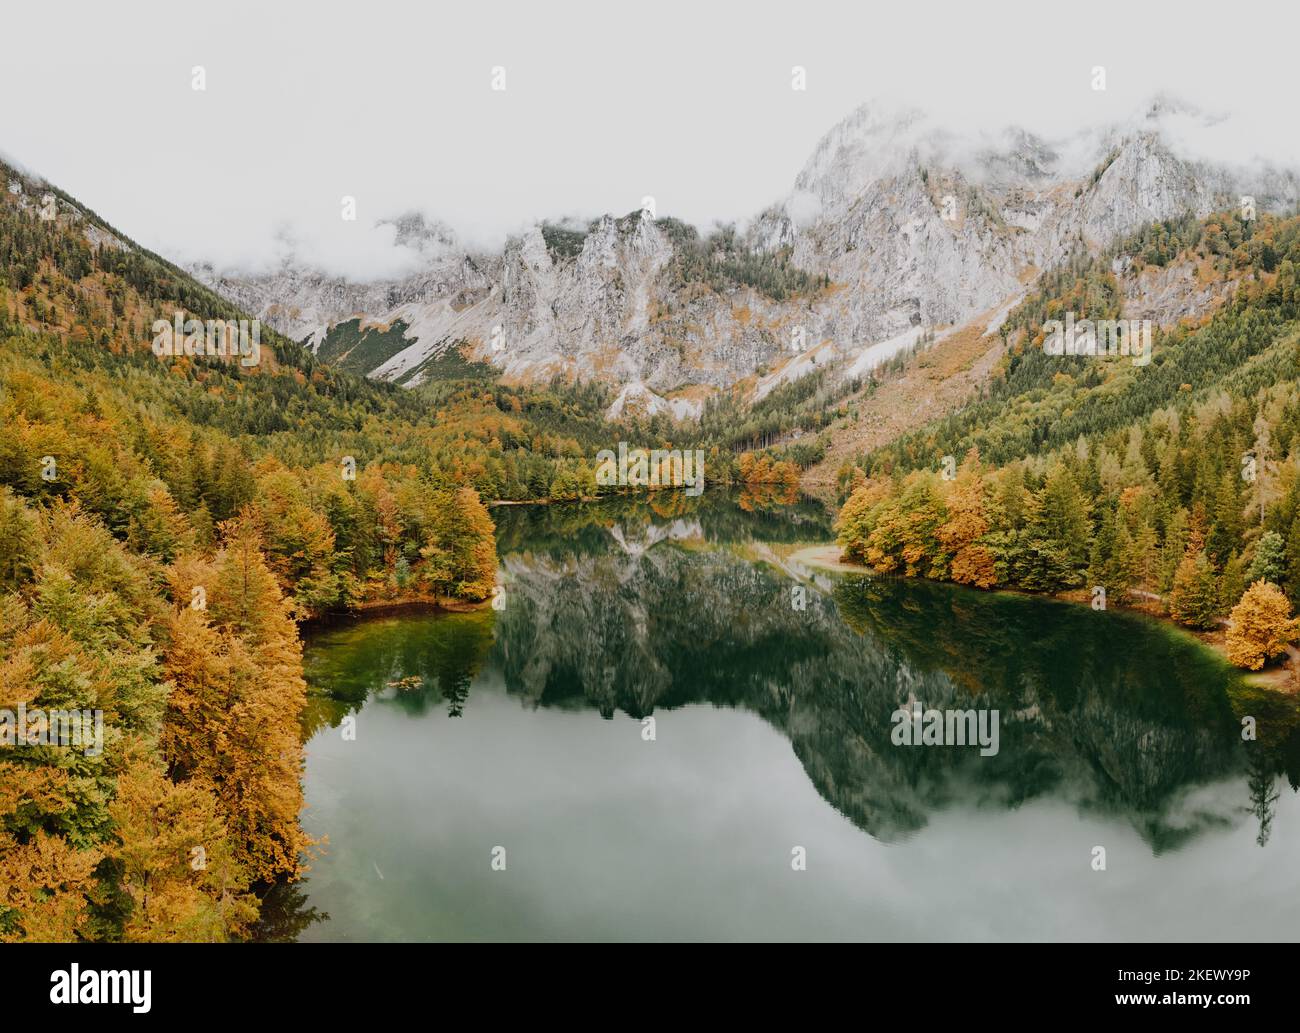 Lake Hinterer Langbathsee in Austria. Scenic place during on a rainy autumn day. Stock Photo